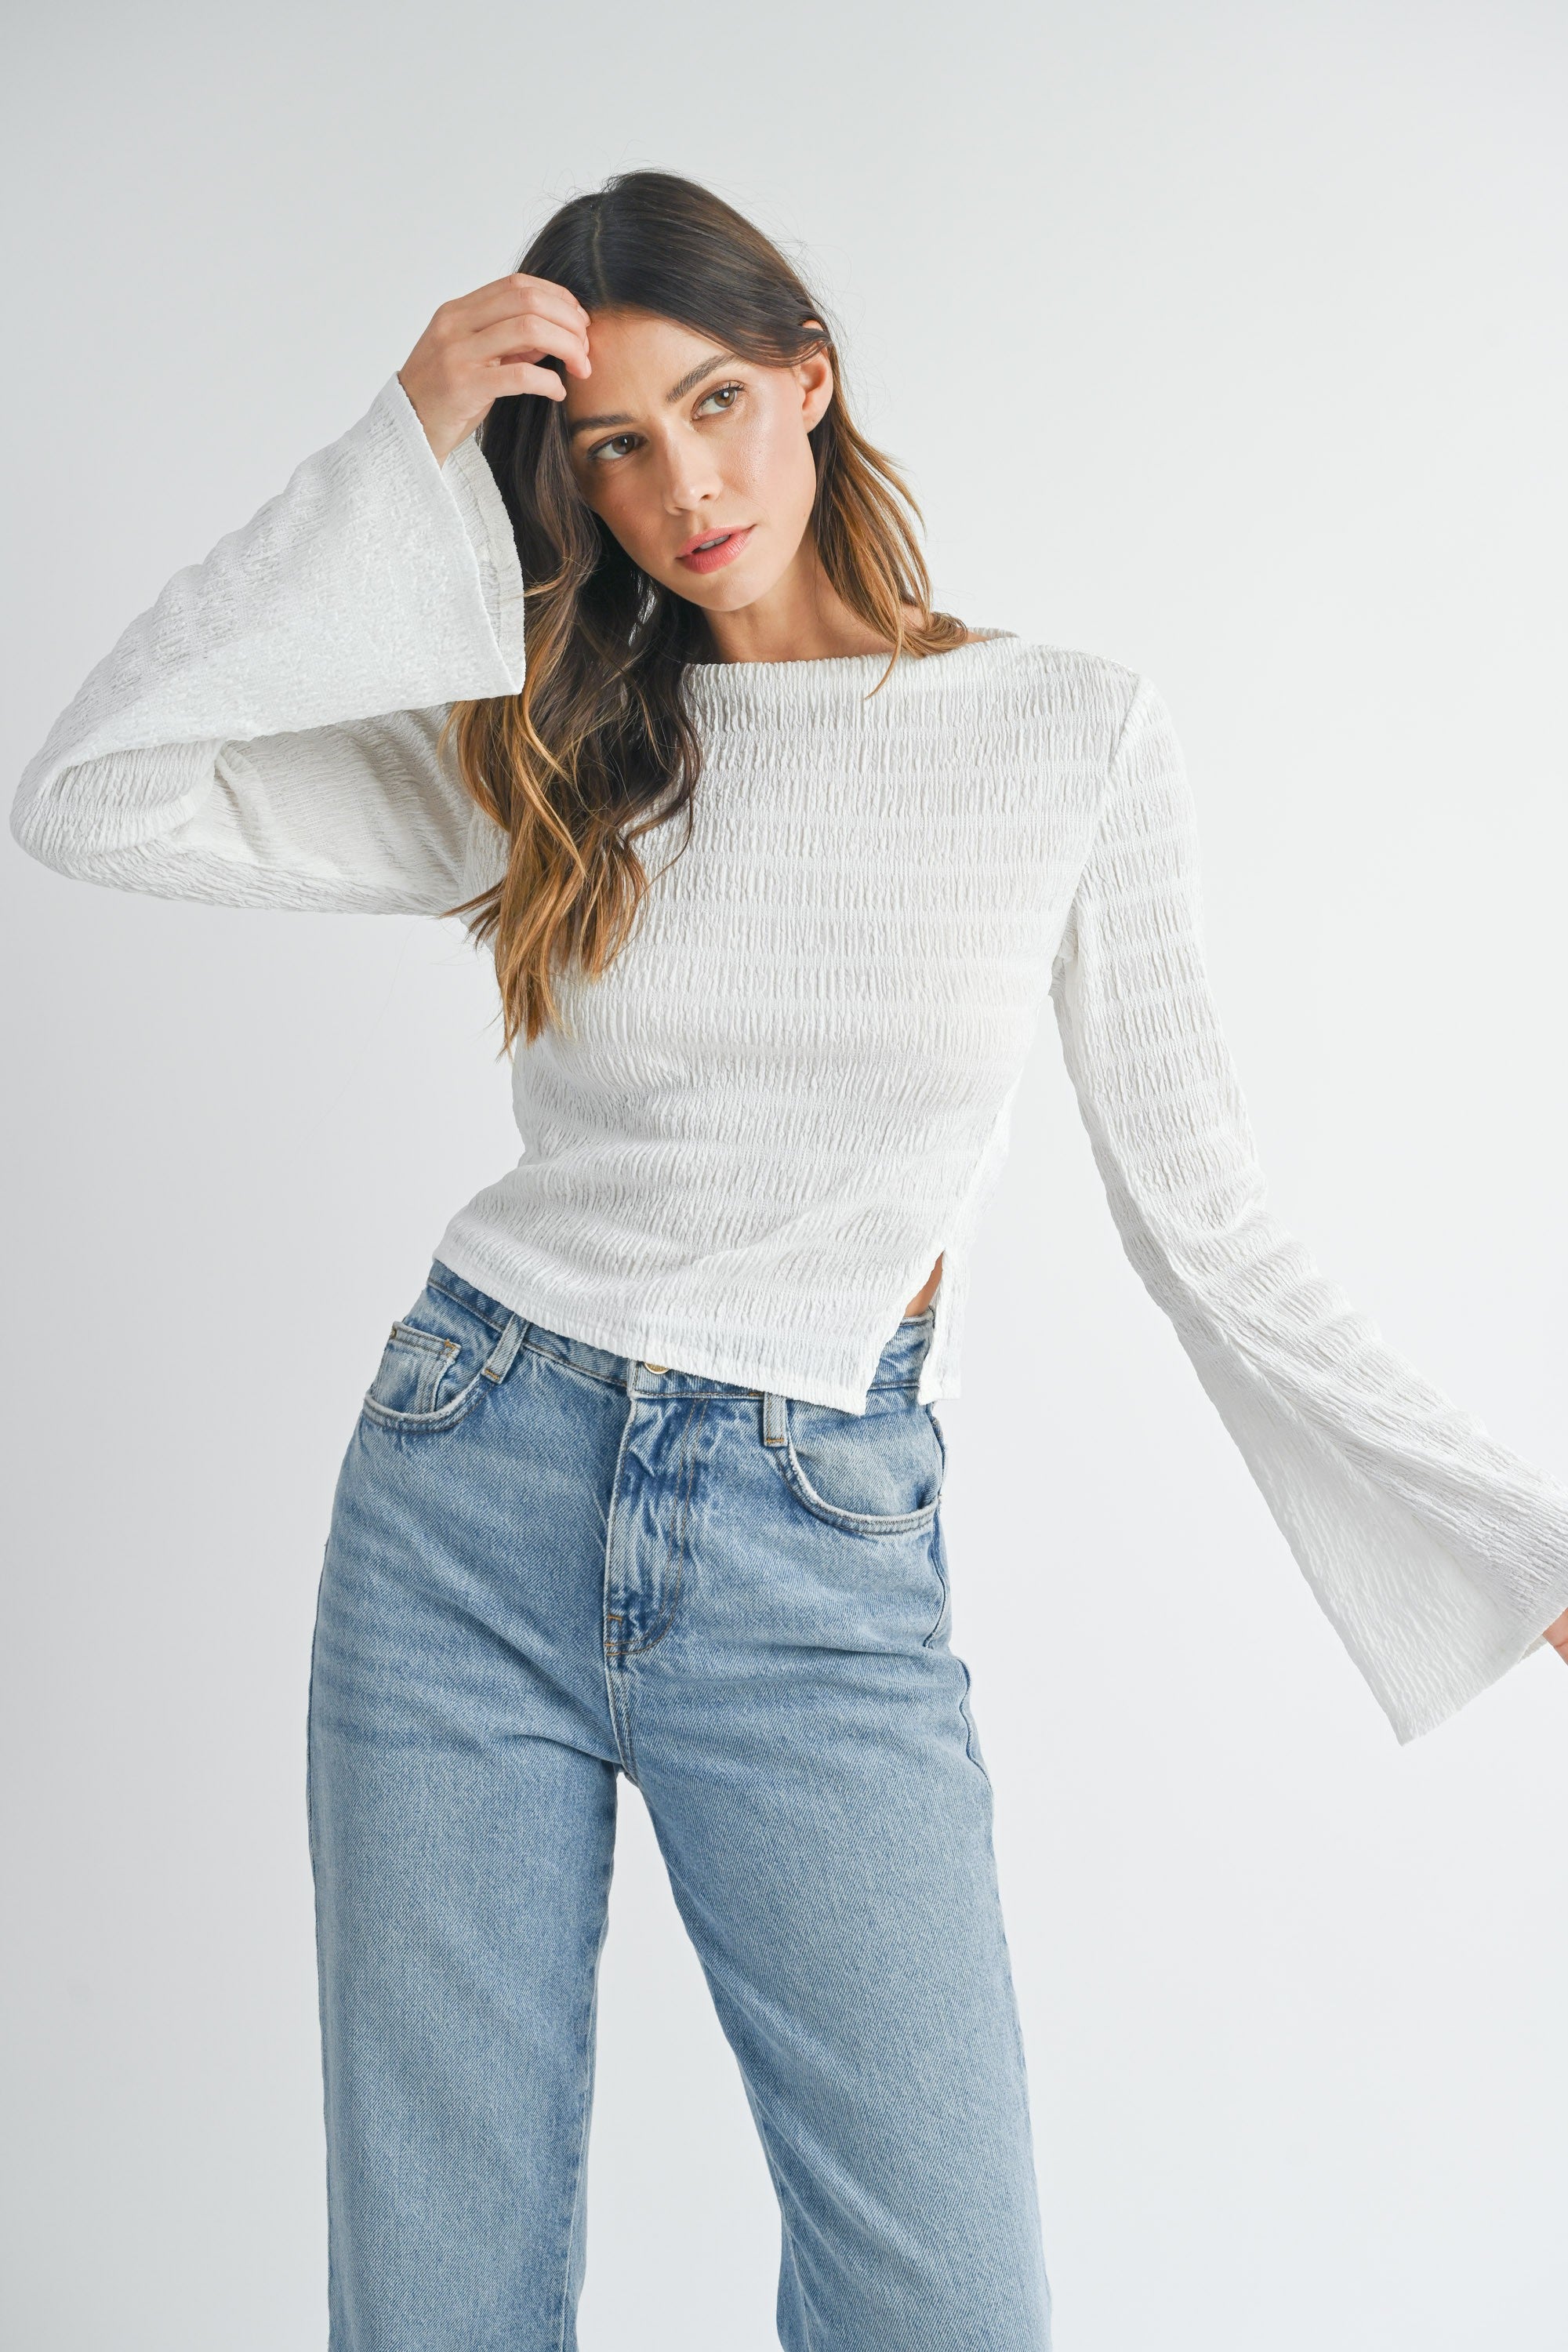 Textured Side Slit Boat Neck Top | Collective Request 